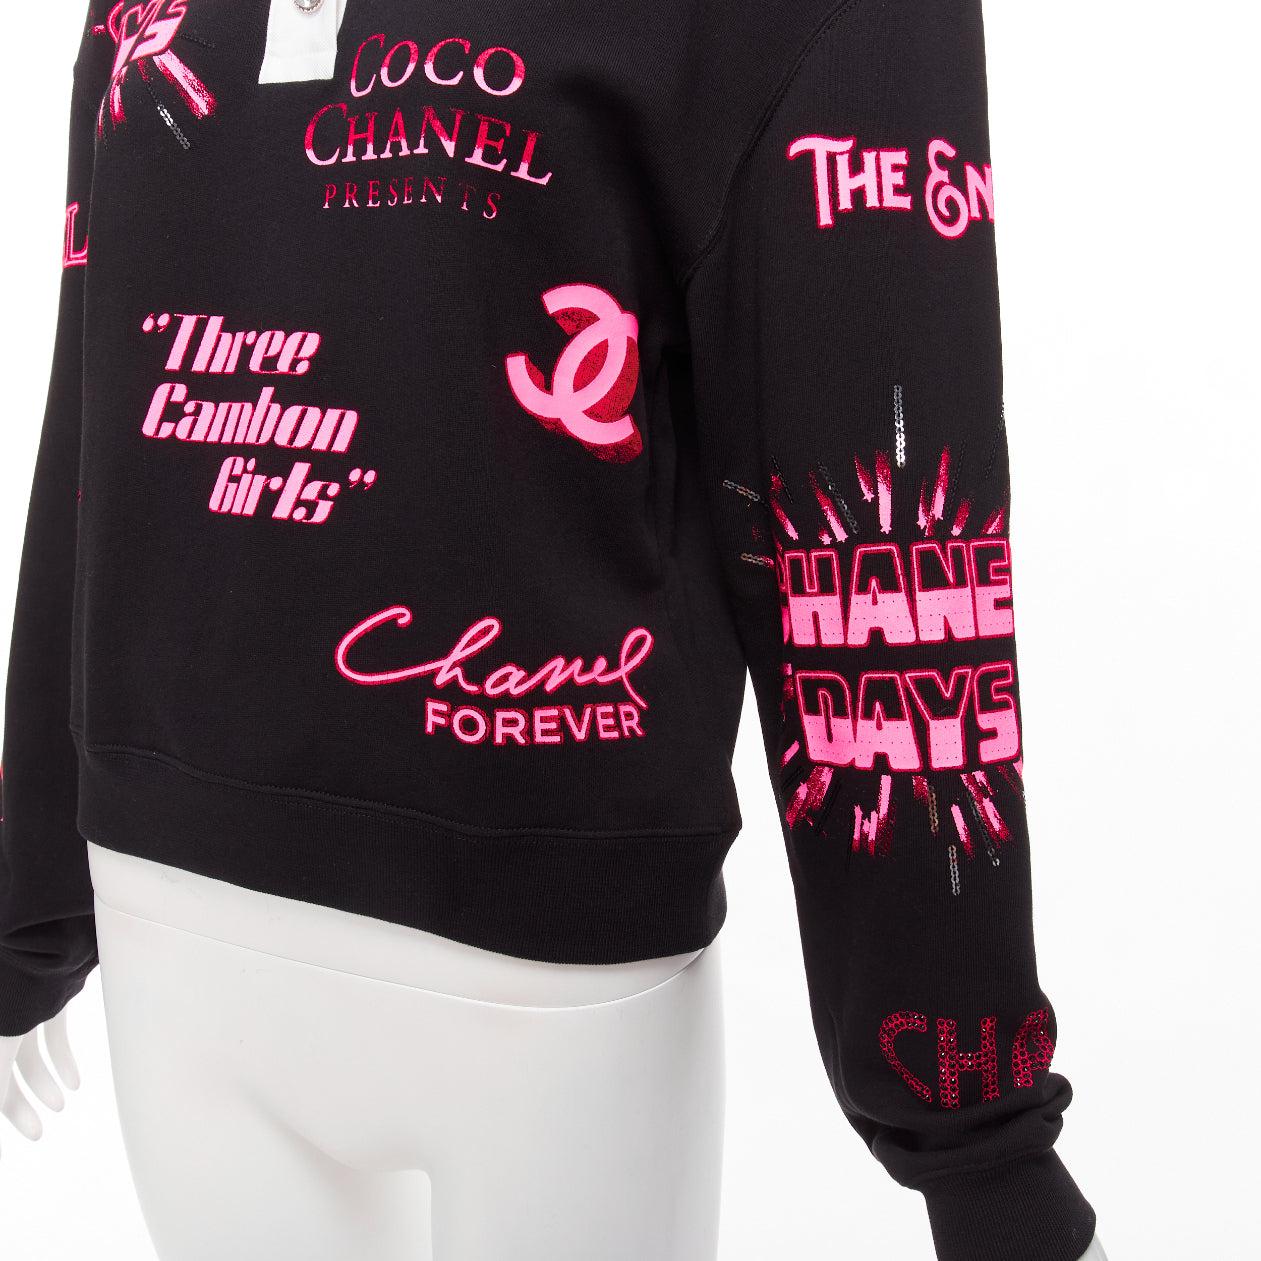 CHANEL neon pink black CC logo graphic cotton 5 silver button polo shirt S
Reference: AAWC/A01130
Brand: Chanel
Designer: Virginie Viard
Material: Cotton
Color: Black, Pink
Pattern: Solid
Closure: Button
Extra Details: Neon pink 